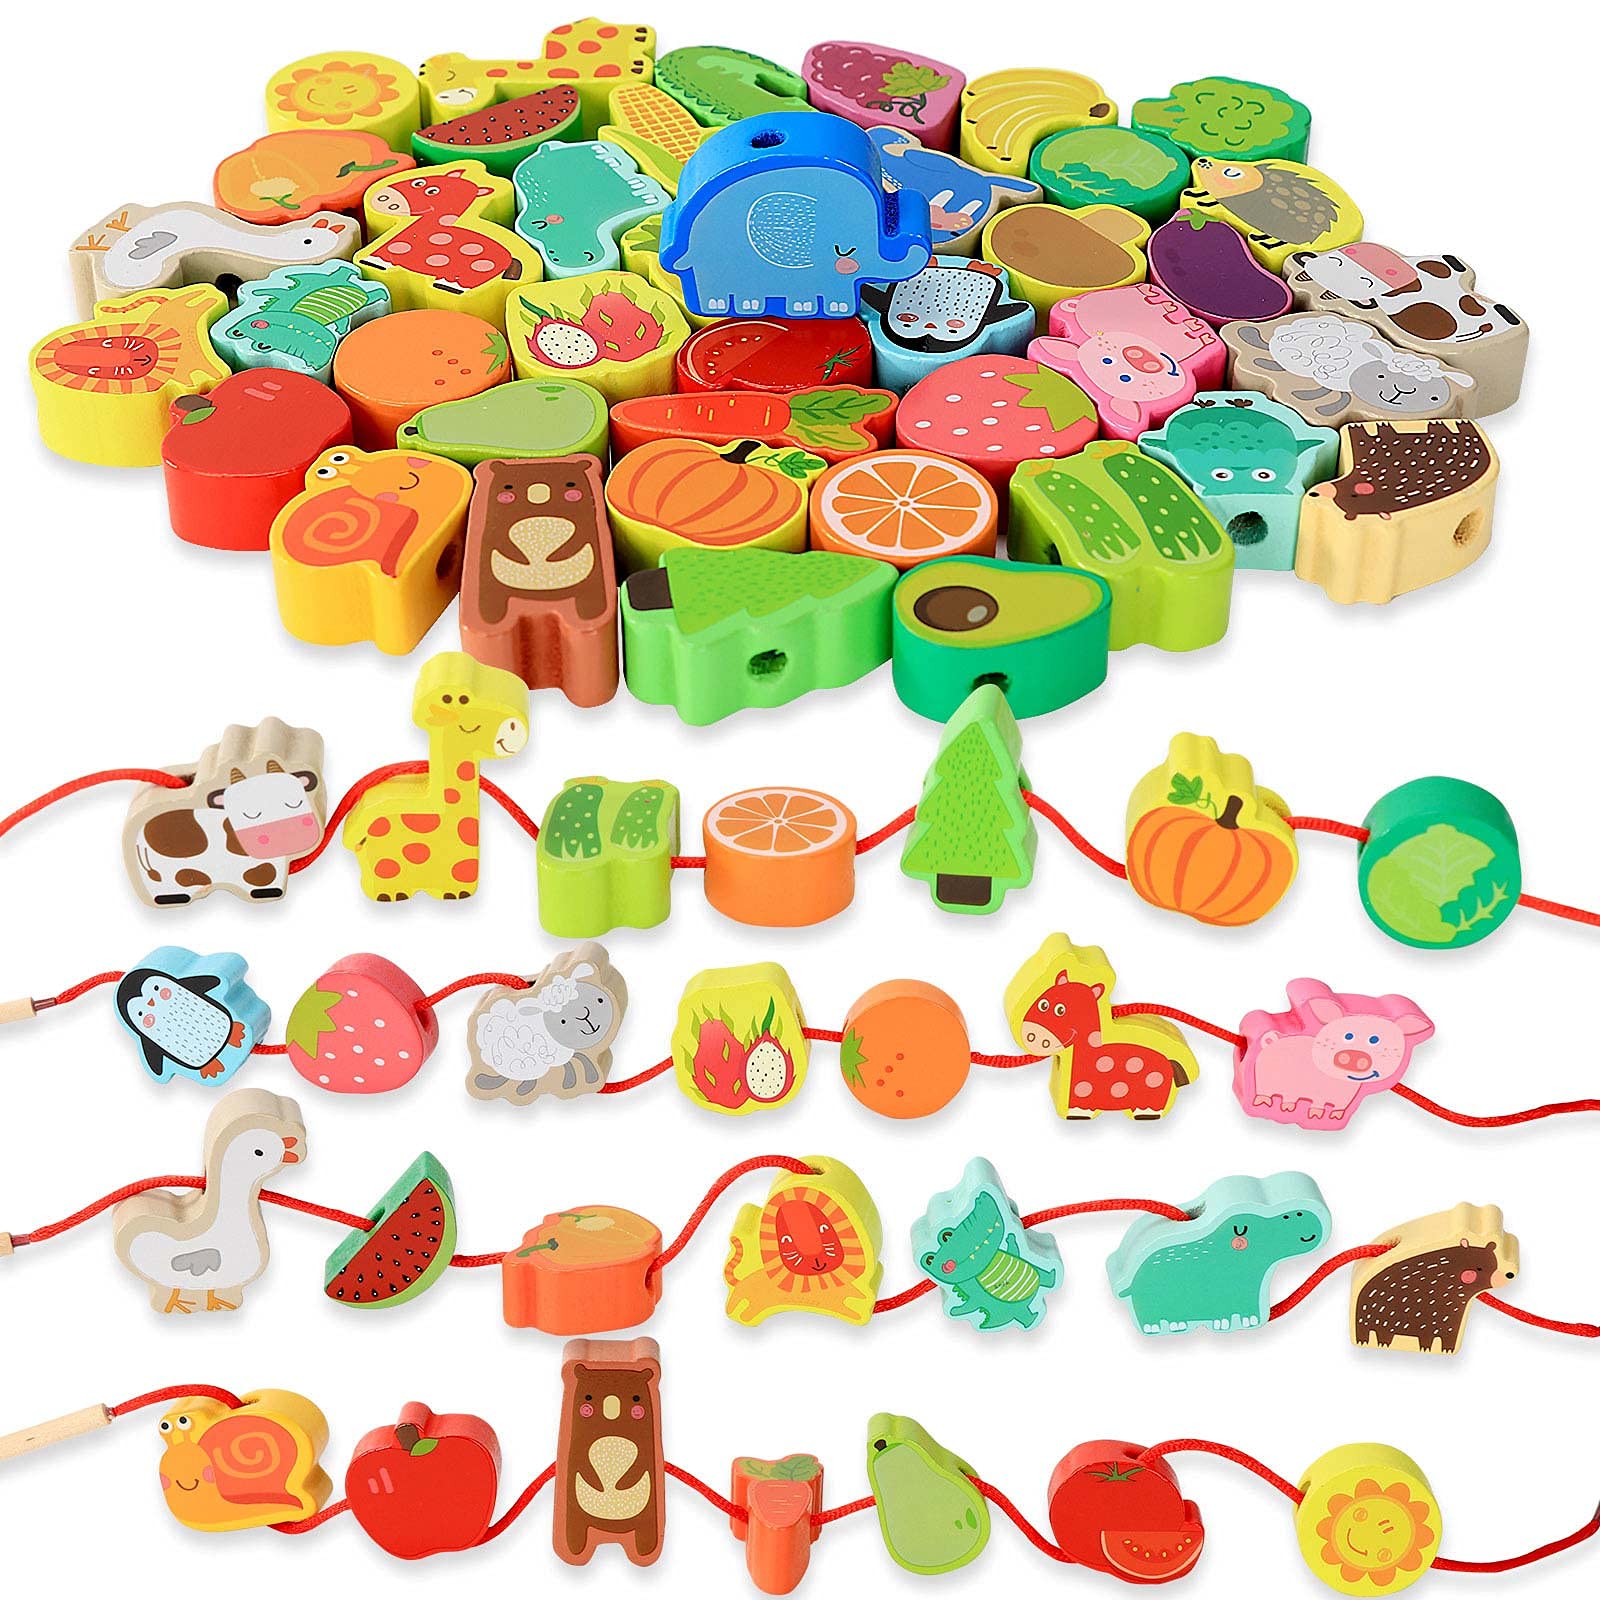 BMTOYS Montessori Educational Threading Toys Wooden Stringing Farm Animals Fruits Lacing Beads Preschool Toy for Toddler 18 Month 1 2 3 4 5 Year Old Boys Girls